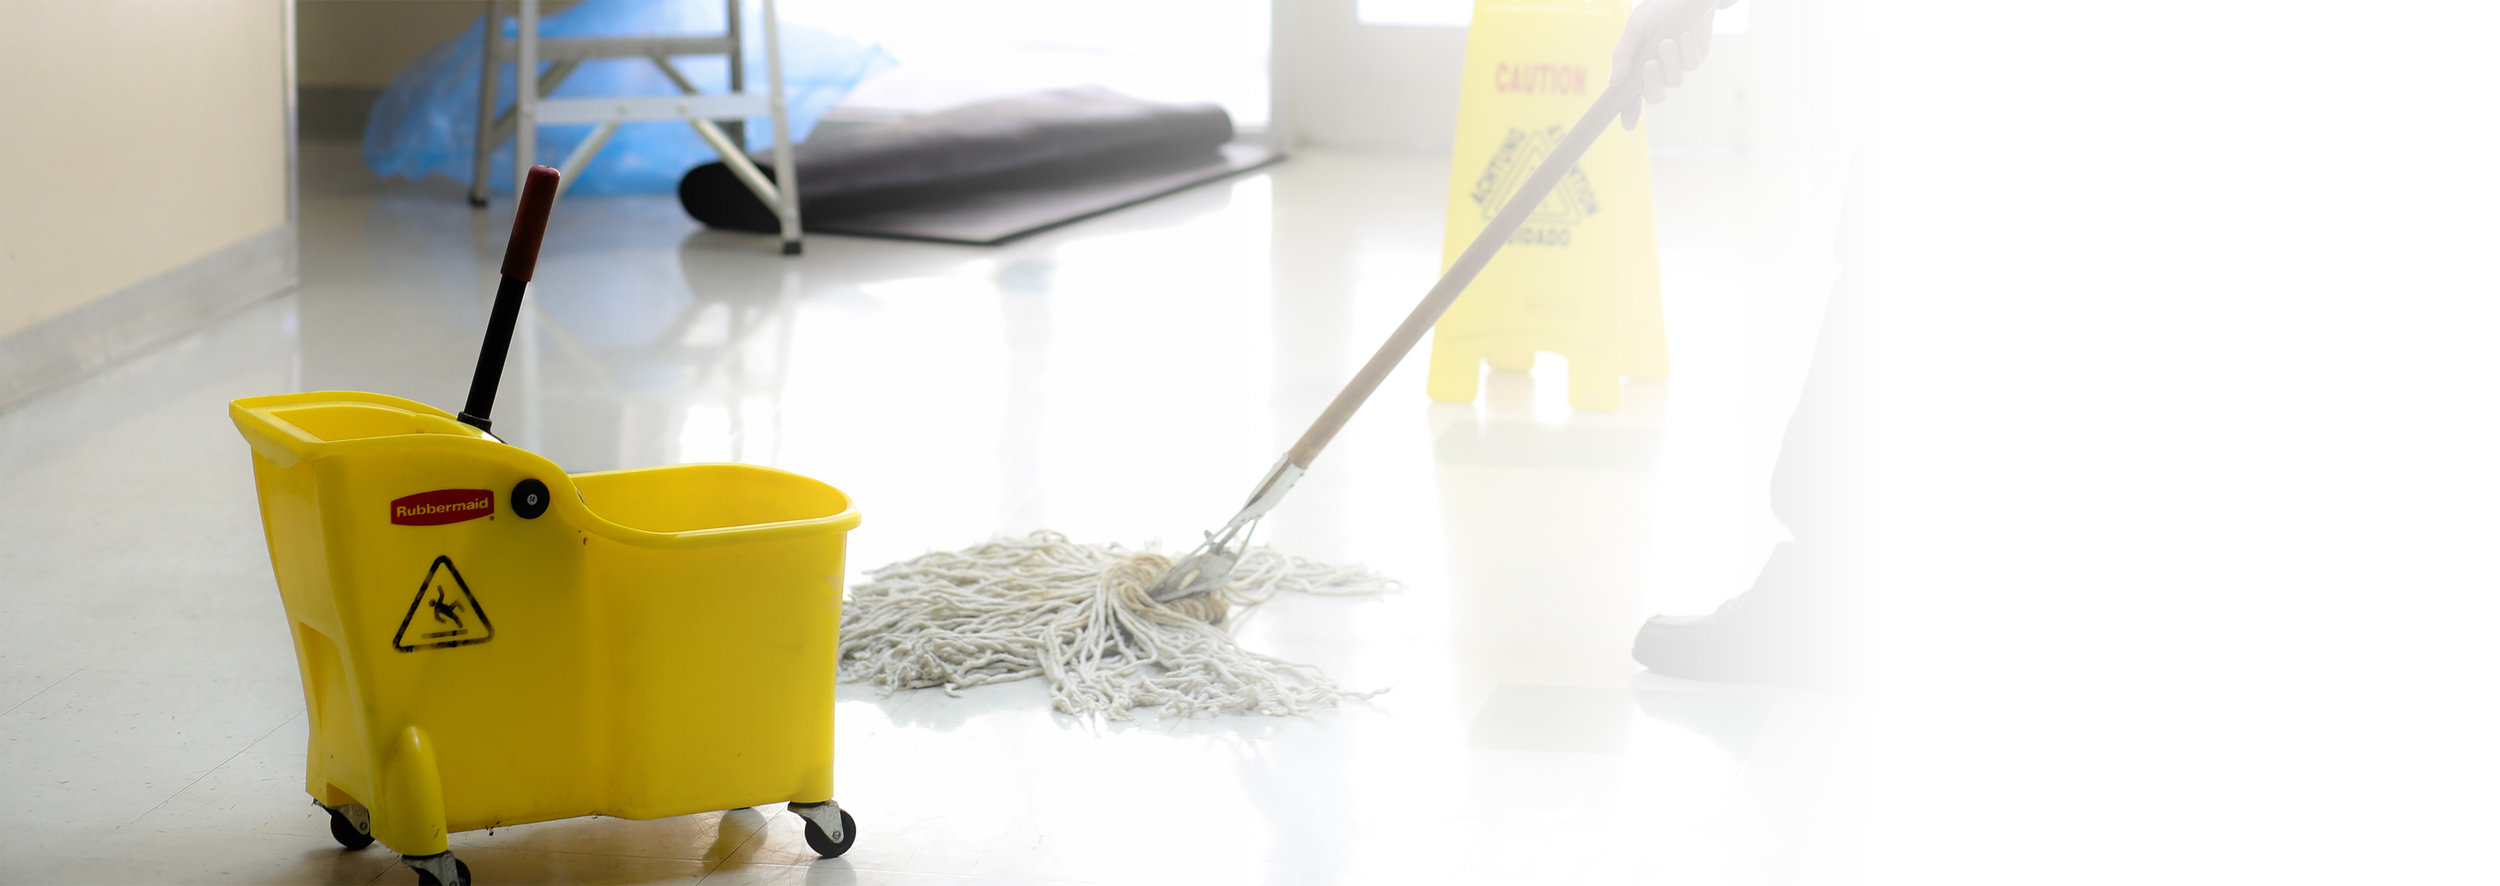 Hard Floor Cleaning Services Near Me » CottageCare